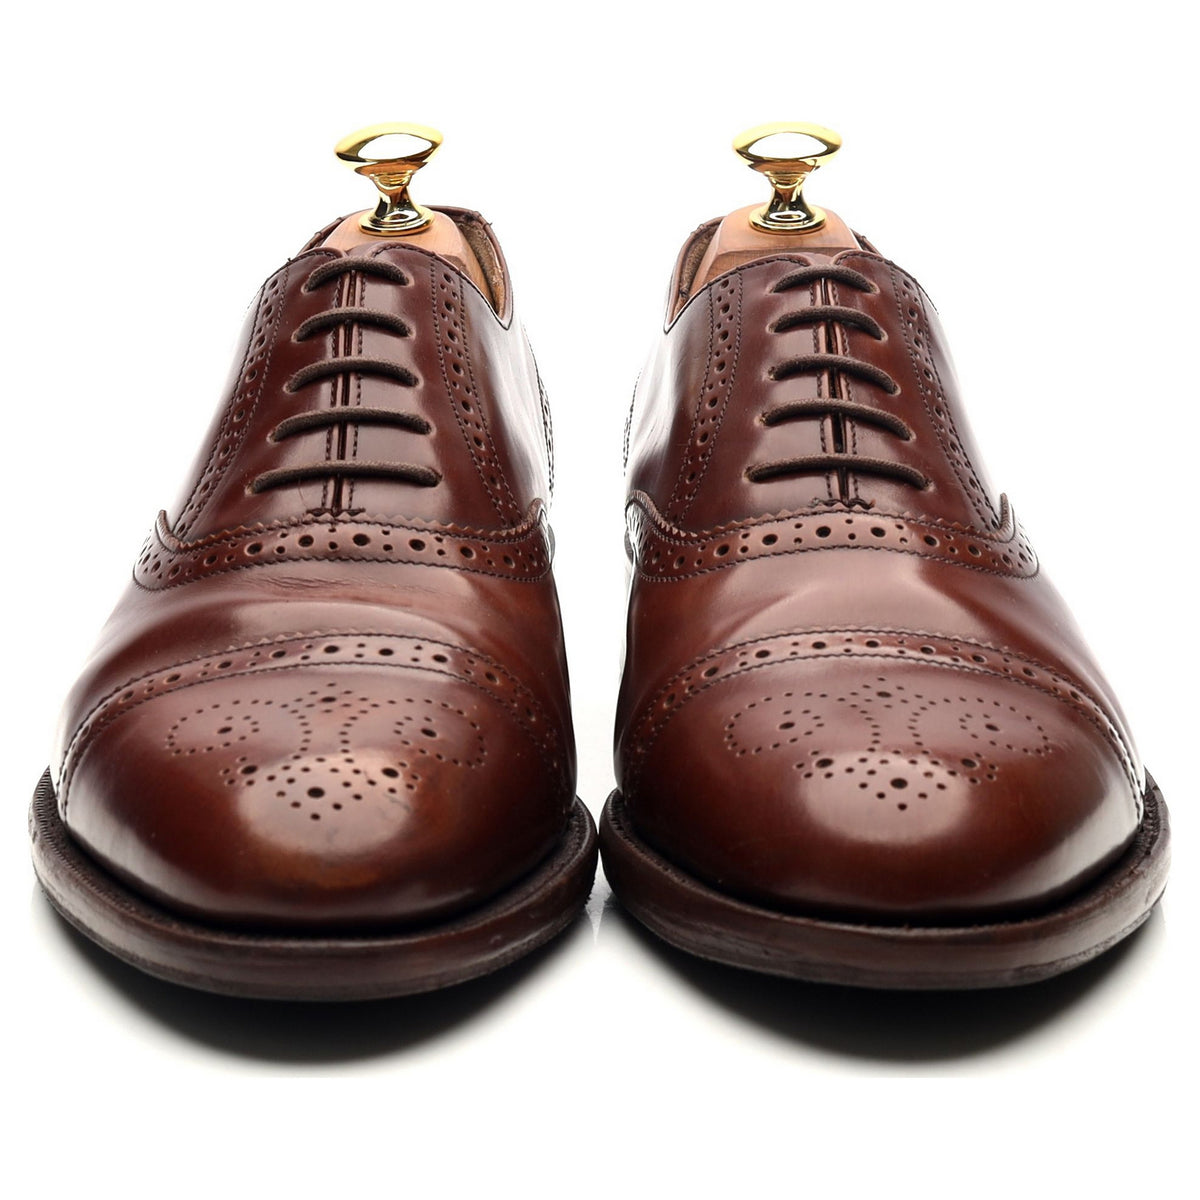 Brown Leather Oxford Brogues UK 6 G